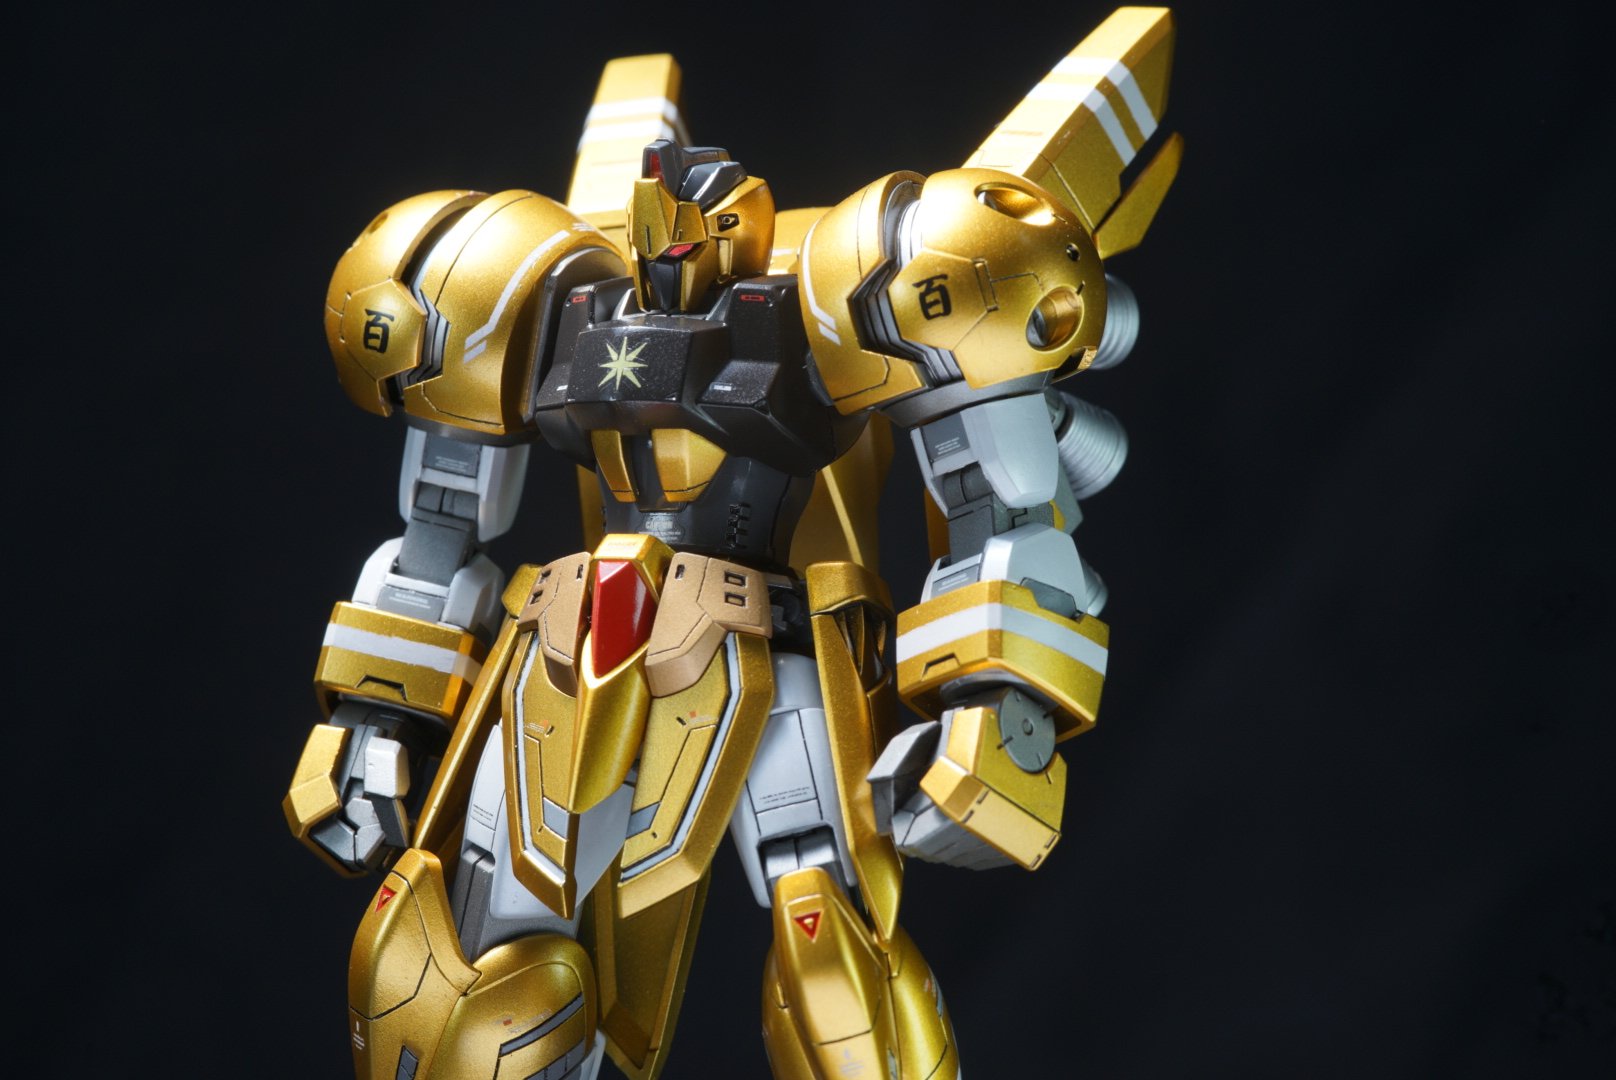 Erick Hg Ms Gatot Kaca Gatot Shiki Custom Done This Build Was Inspired By The Indonesian Folklore And Gundam Build Fighter Series Enjoy Wip Video T Co 1pdmcpnn0b T Co Btzyzqlq7g Twitter